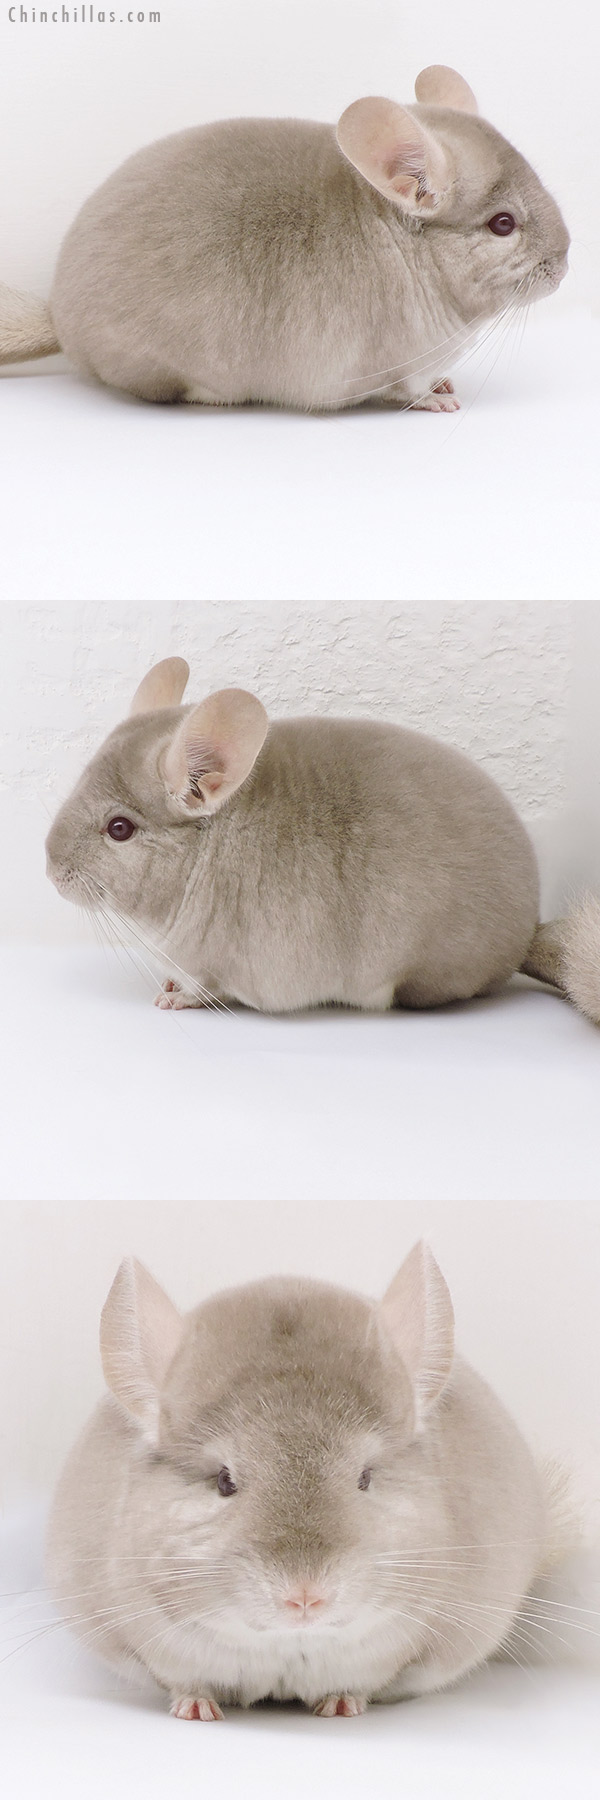 Chinchilla or related item offered for sale or export on Chinchillas.com - 17108 Blocky Show Quality Homo Beige Female Chinchilla